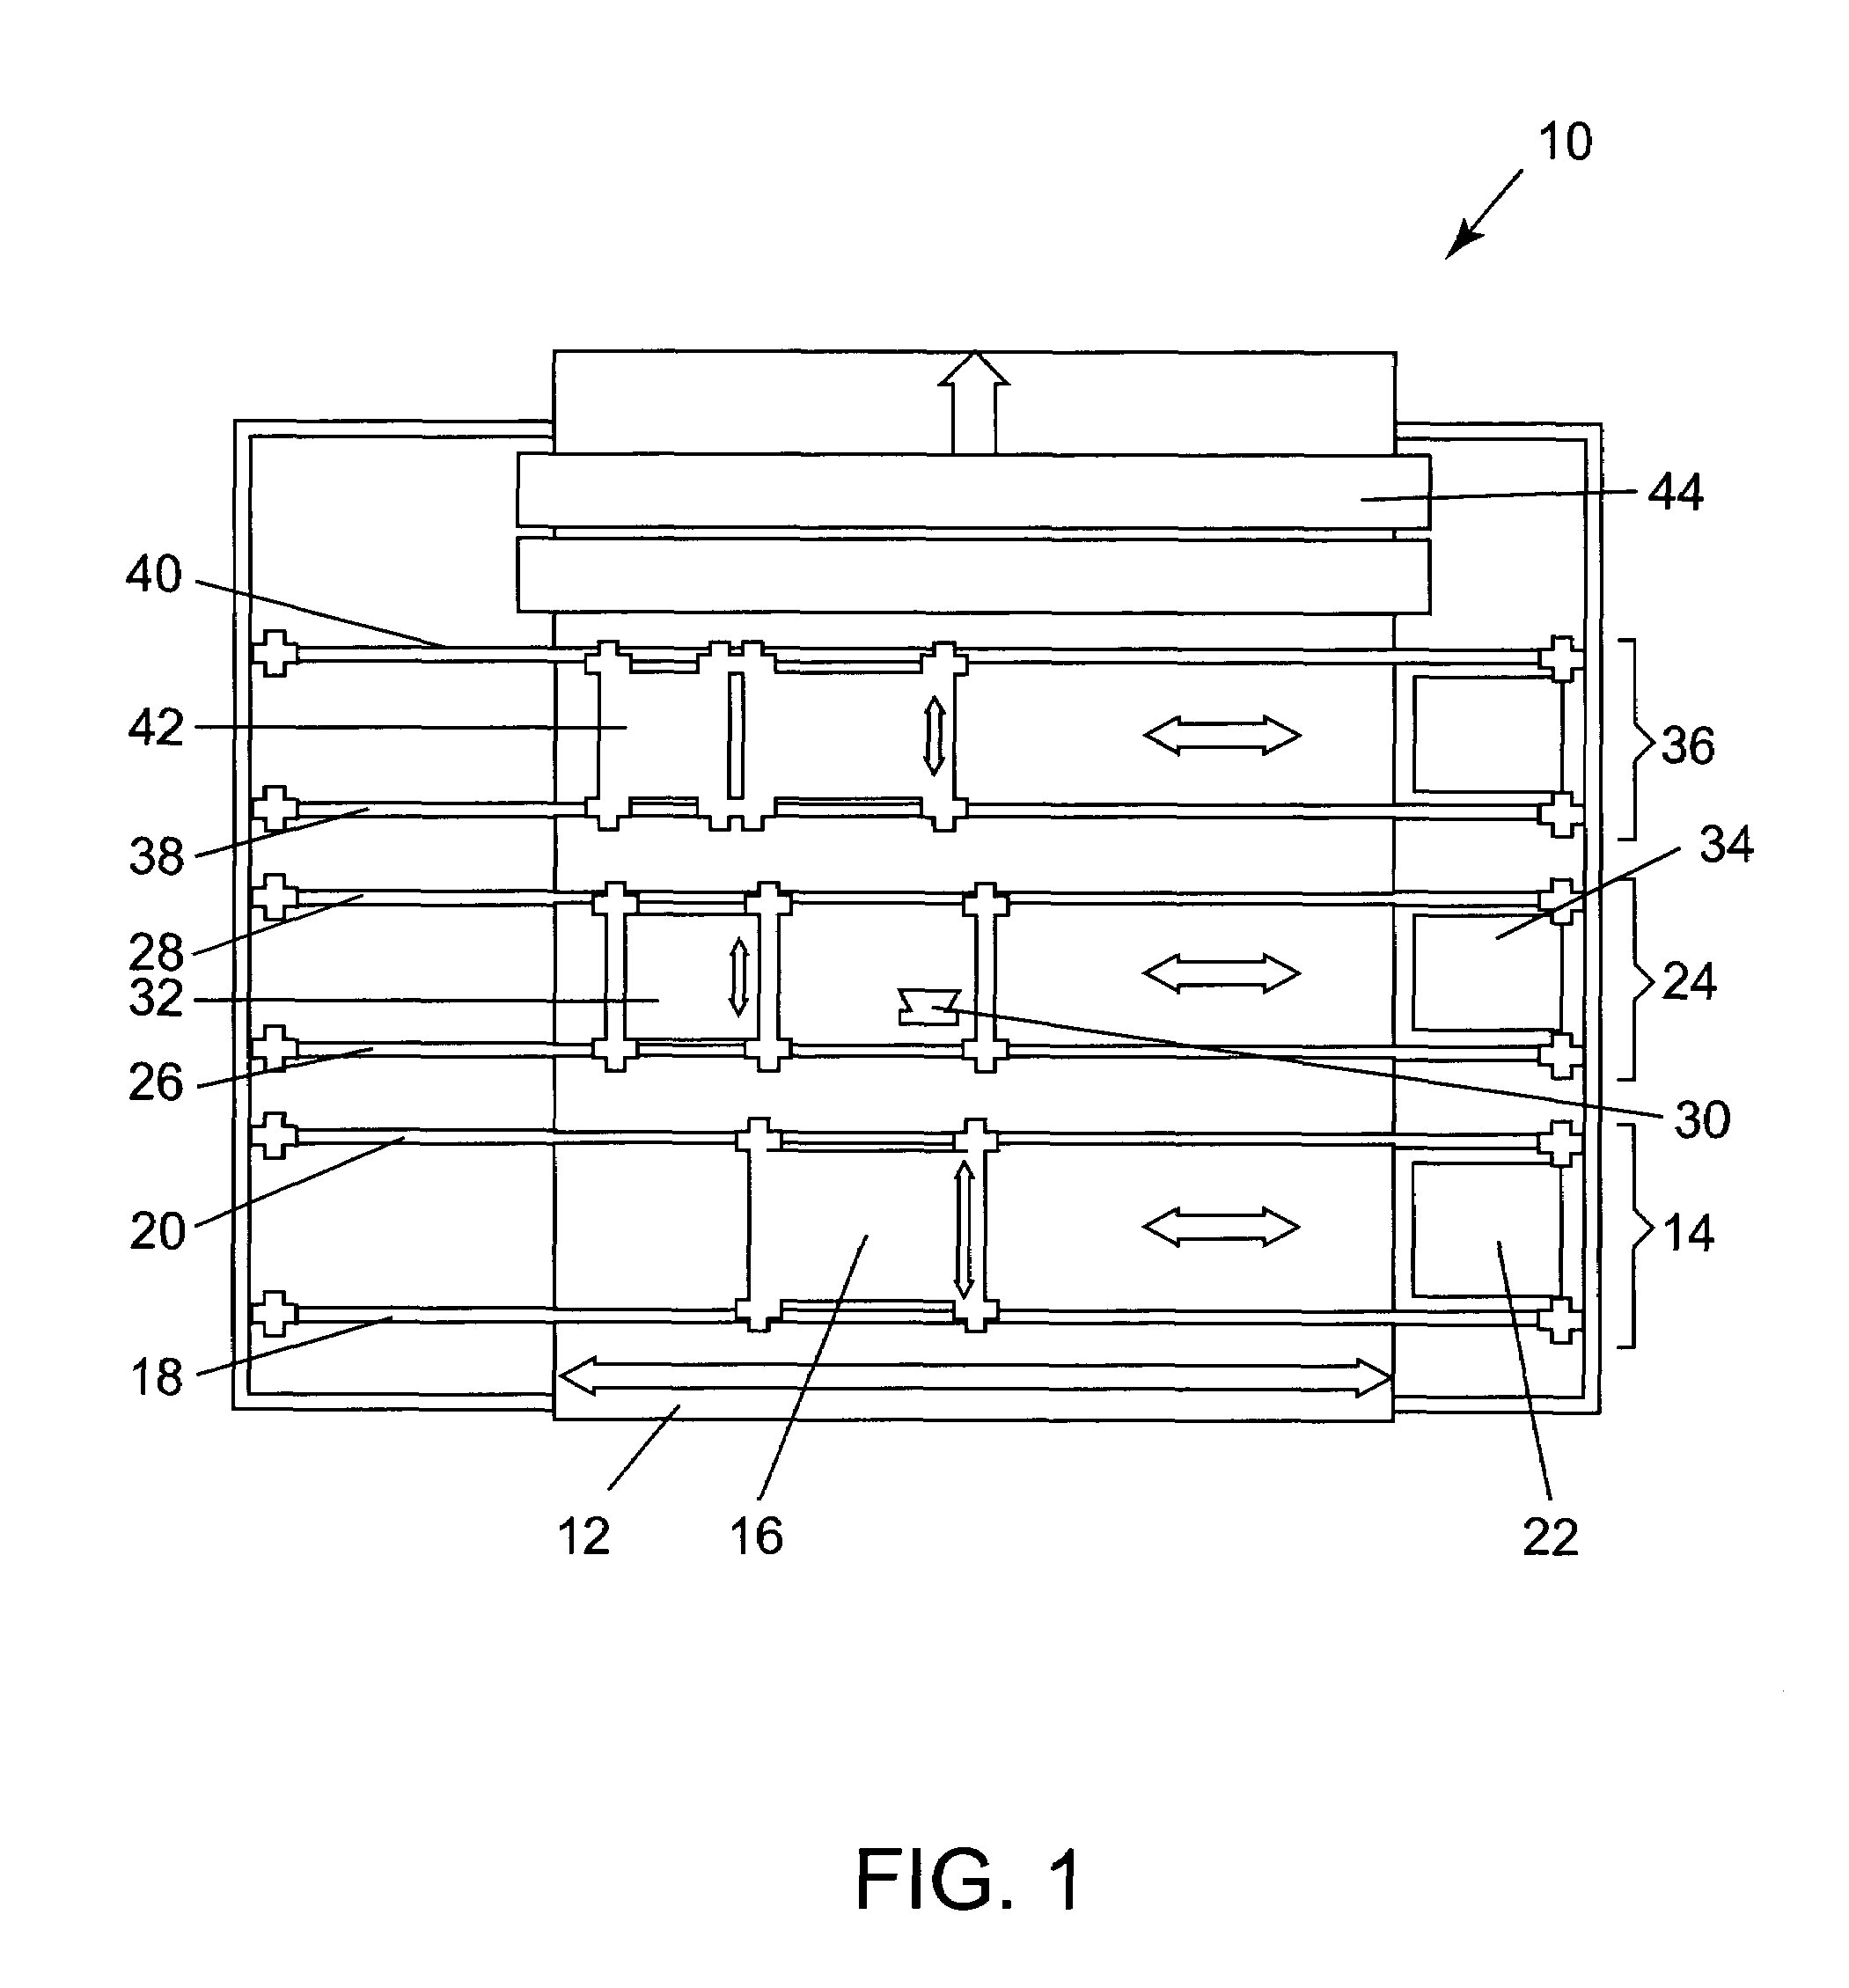 Method for manufacturing resin-impregnated endless belt structures for papermaking machines and similar industrial applications and belt